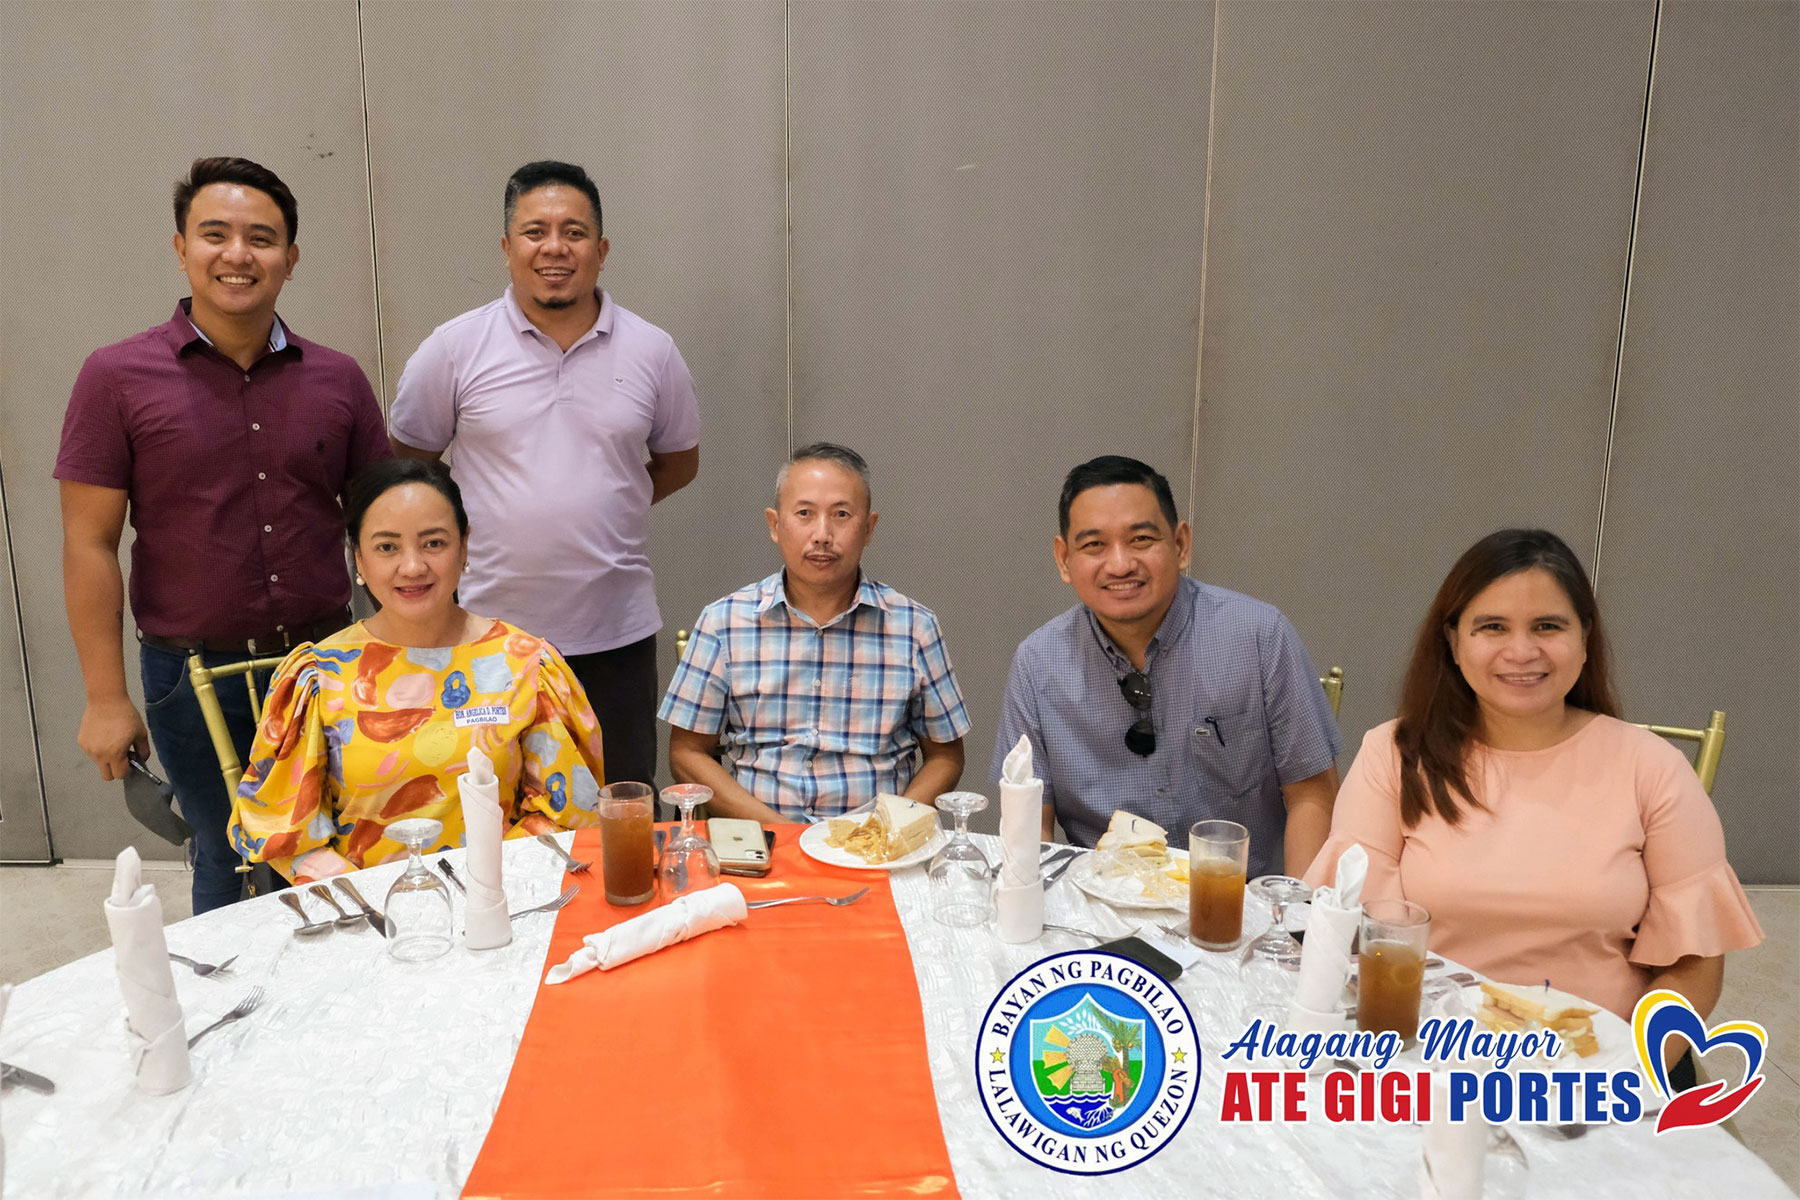 The League of Municipalities of the Philippines Quezon Chapter